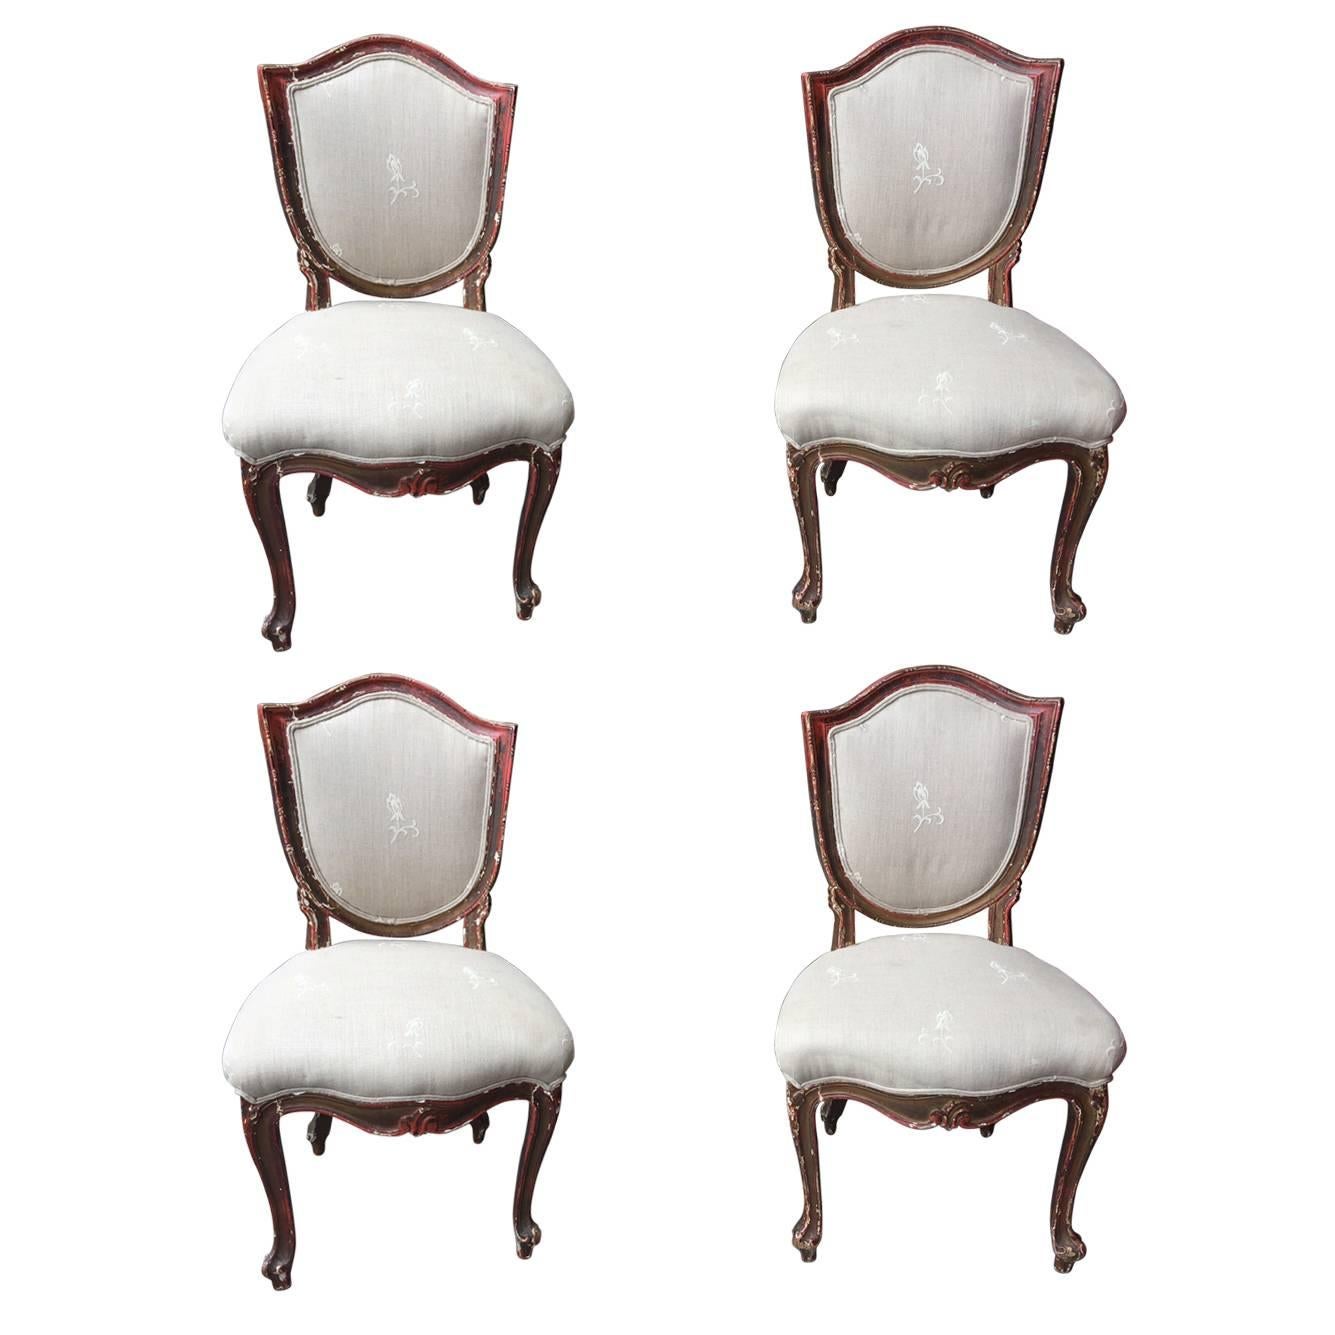 Set of Four Painted Chairs, Italy, 19th Century